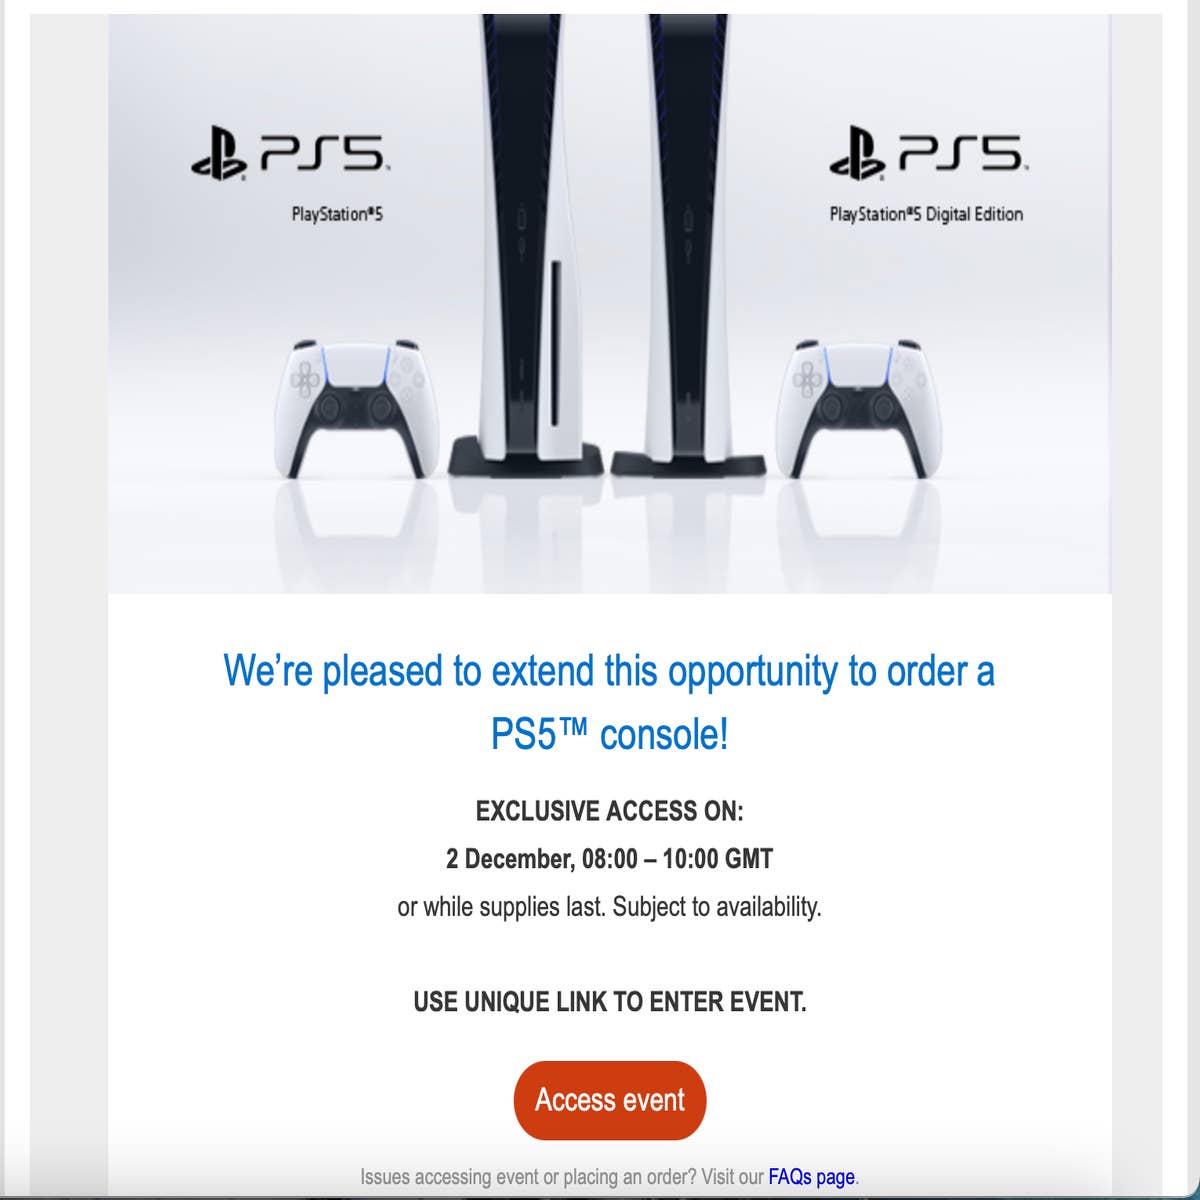 How To Register For A Chance To Buy A PS5 From Sony's PlayStation Direct  Store - PlayStation Universe